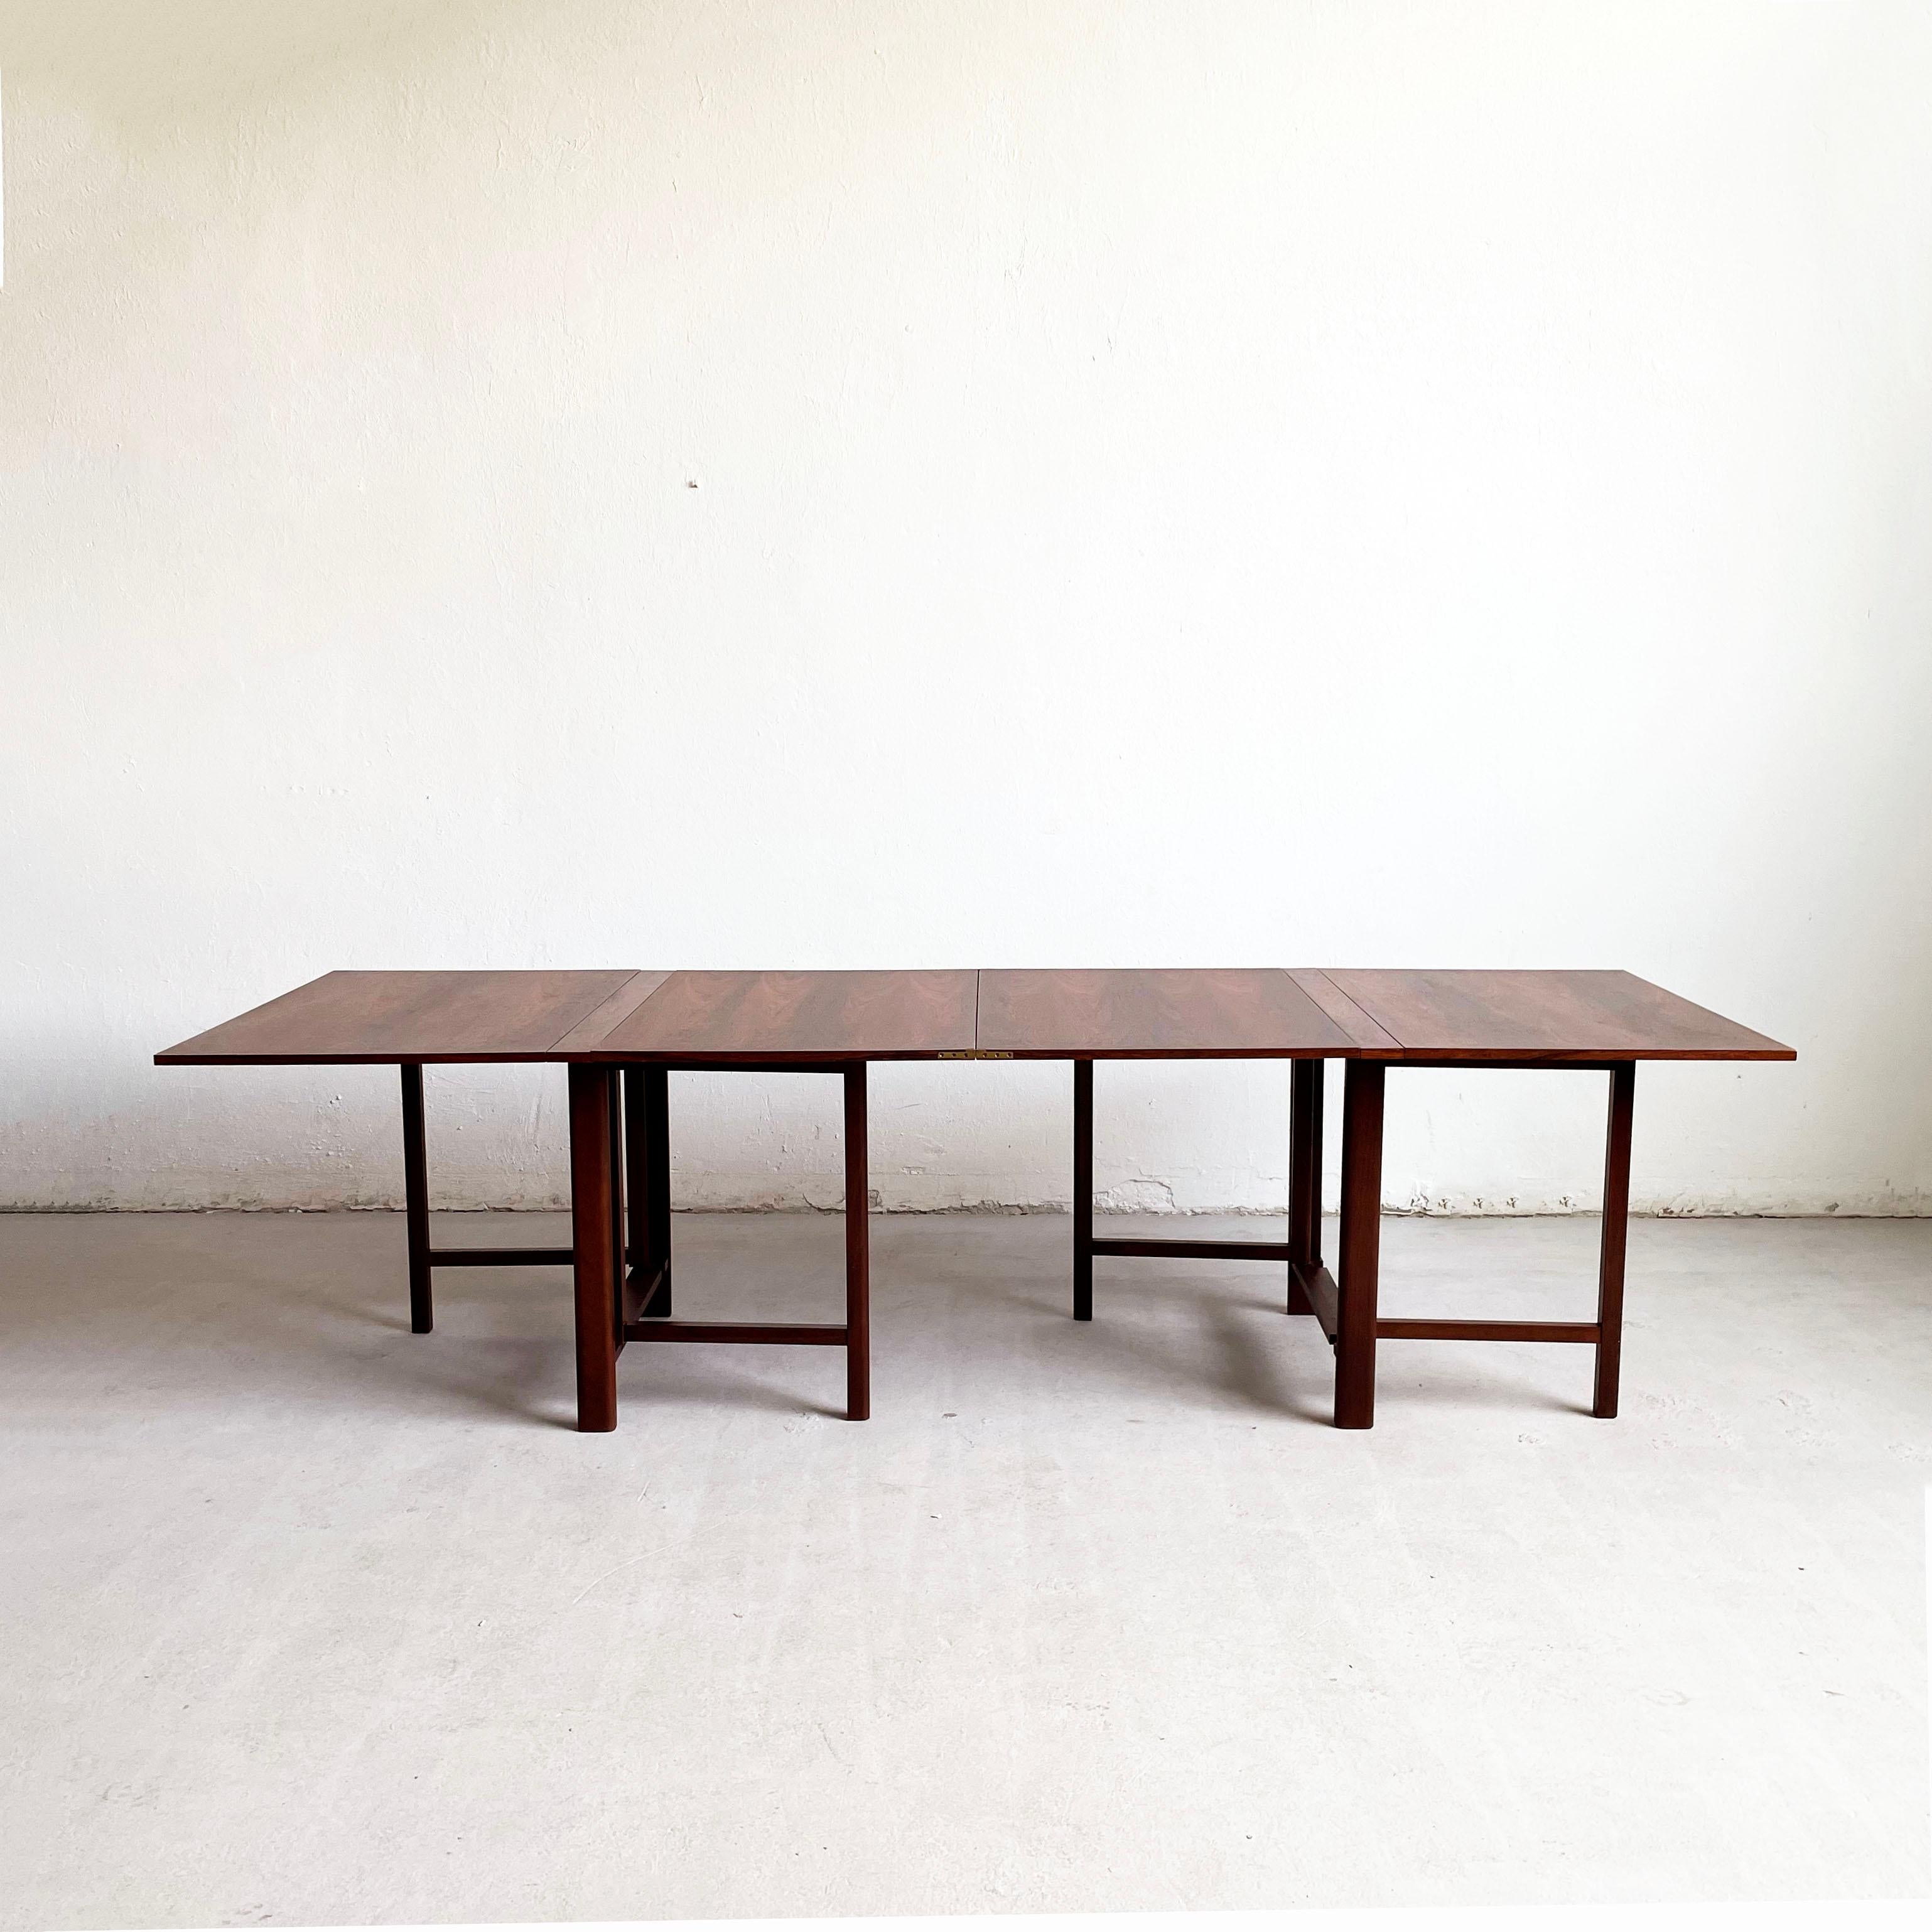 Iconic Scandinavian Maria folding dining table designed by Bruno Mathsson in 1936 

Very influential Swedish designer Bruno Mathsson designed this famous table in 1936 for Karl Mathsson. 

The table is created to be versatile, adjustable and